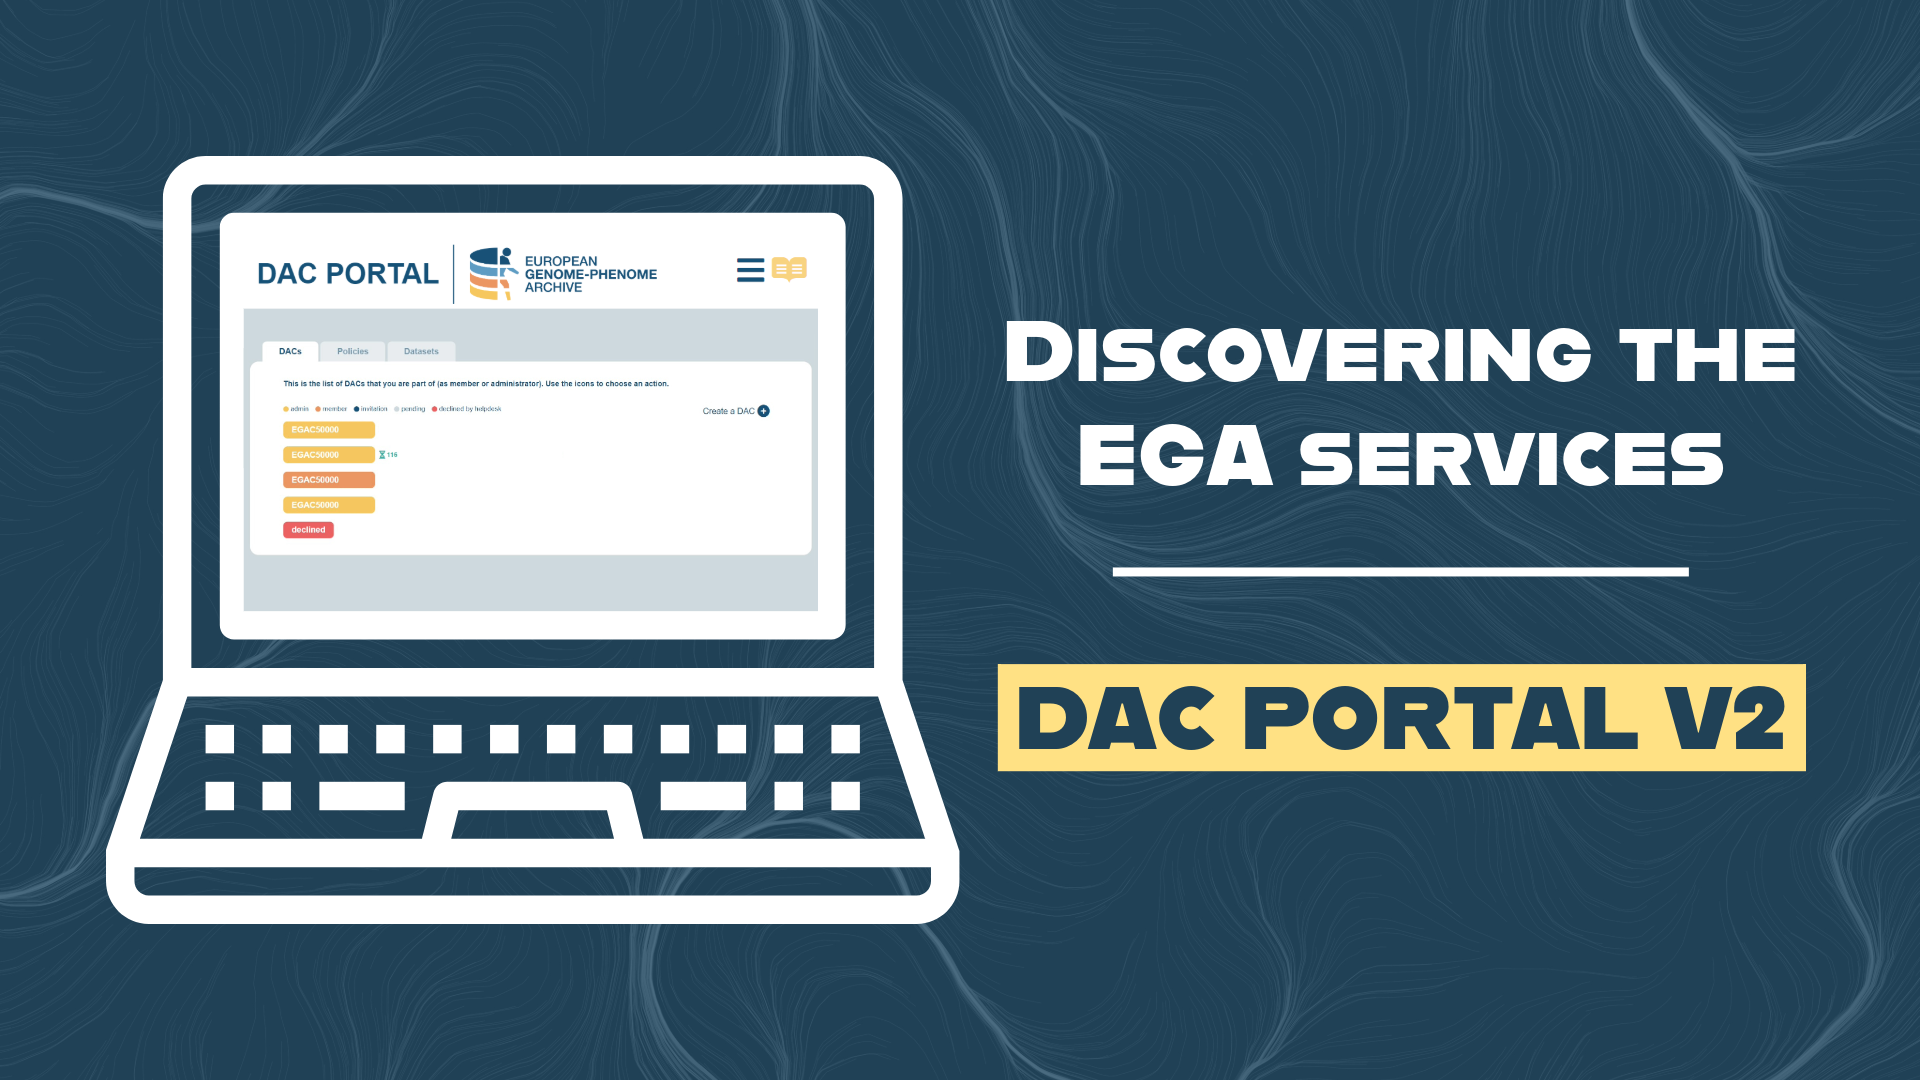 All you need to know about our new DAC Portal v2 thumbnail